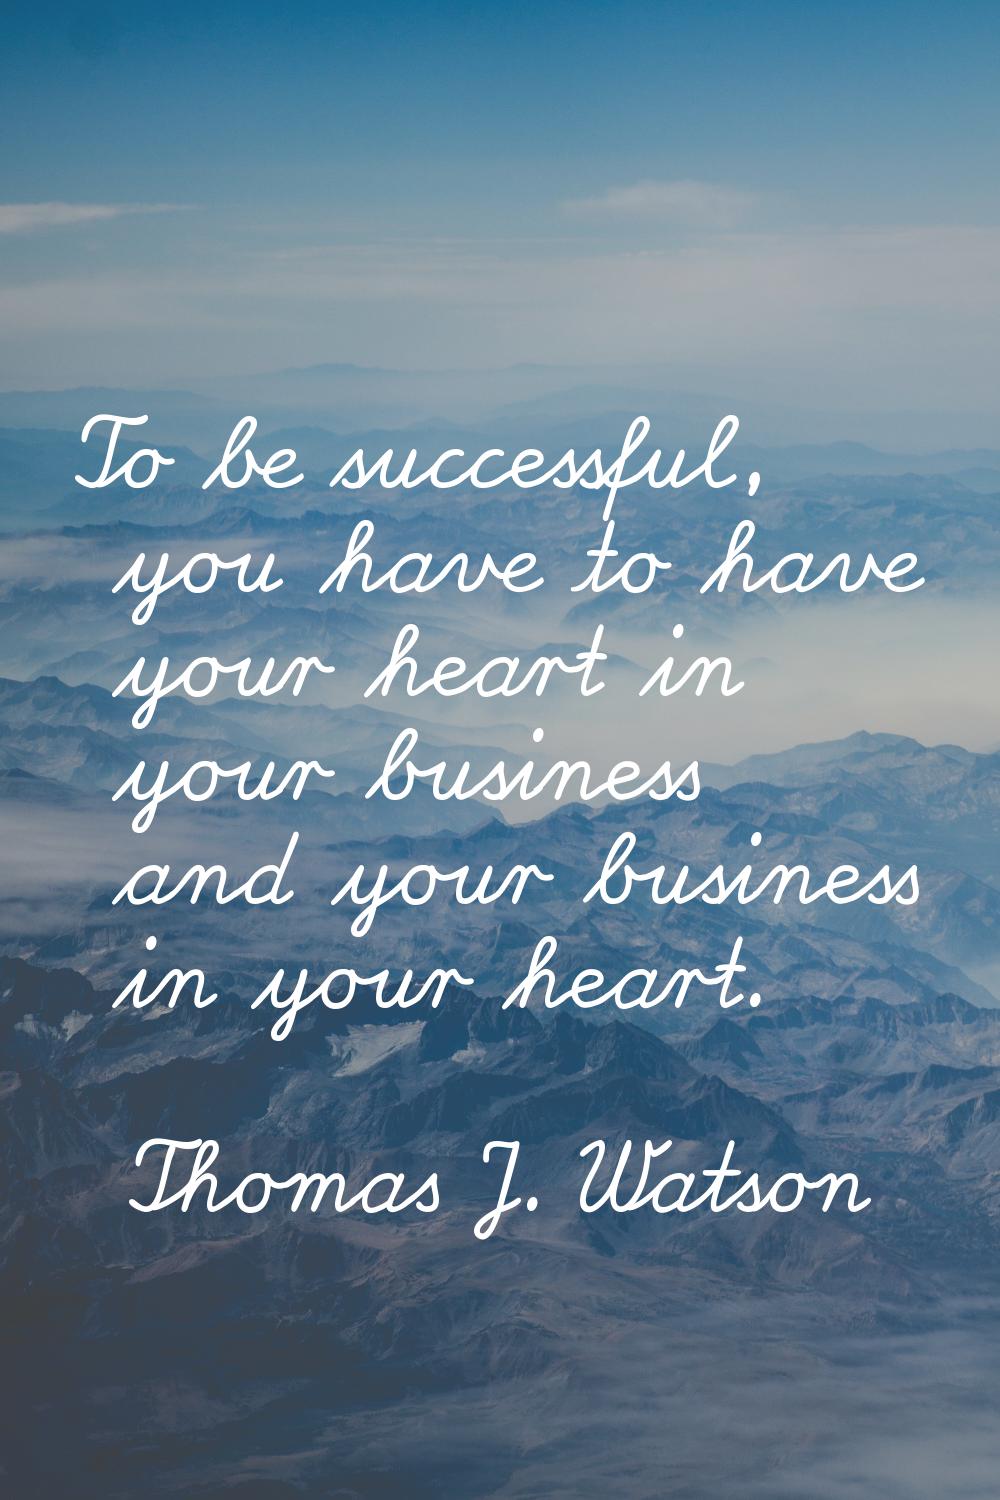 To be successful, you have to have your heart in your business and your business in your heart.